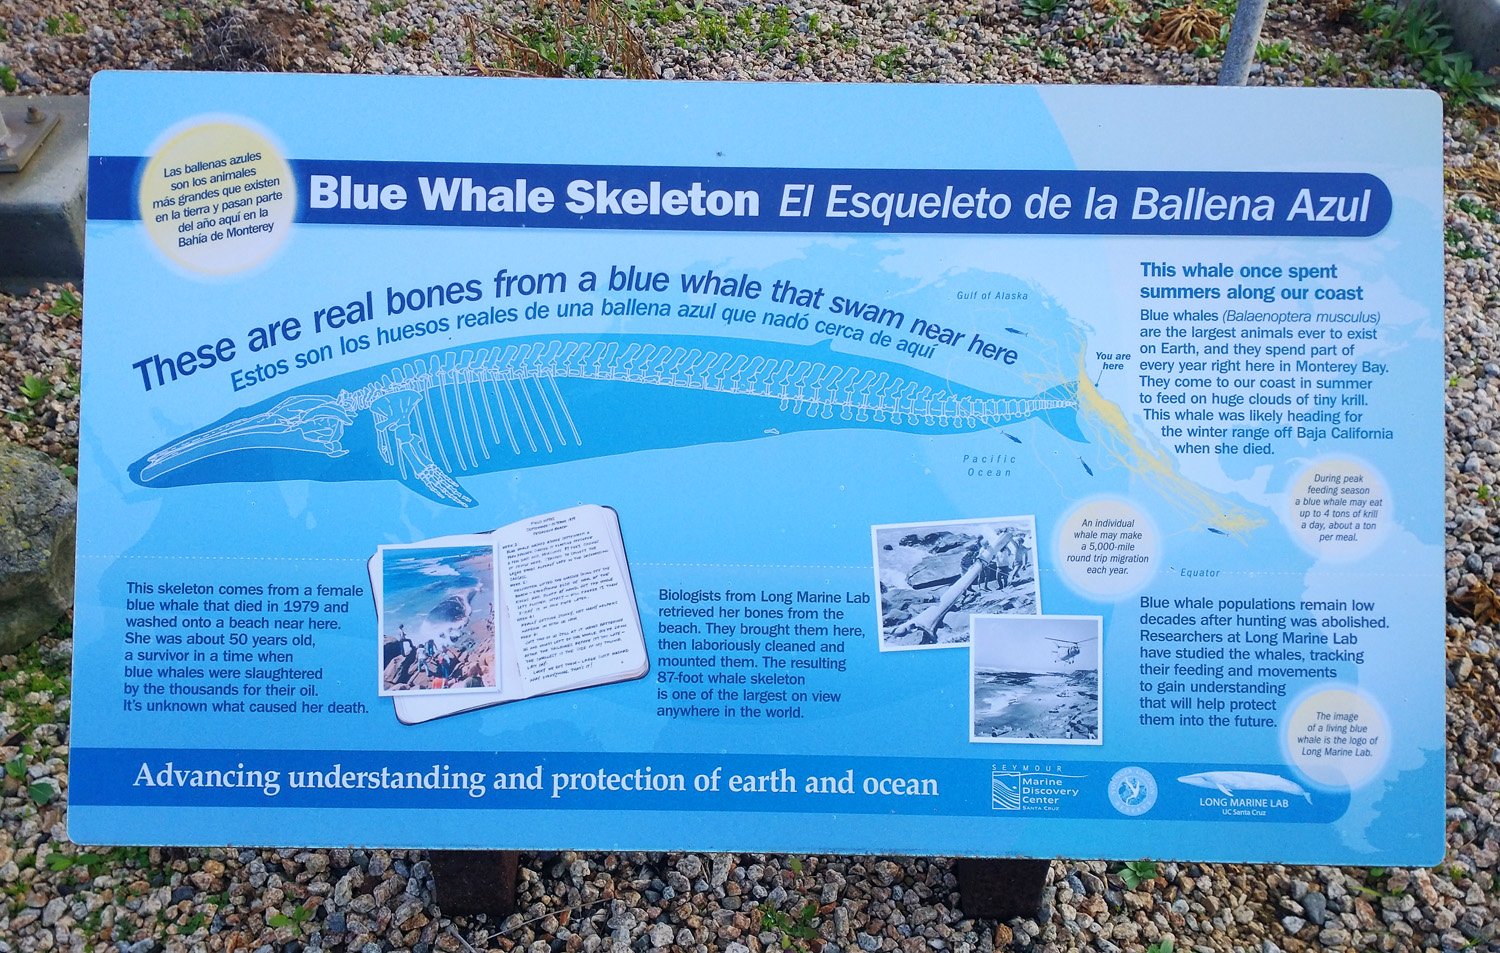 You can visit this blue whale skeleton sitting right outside the oceanic research center.